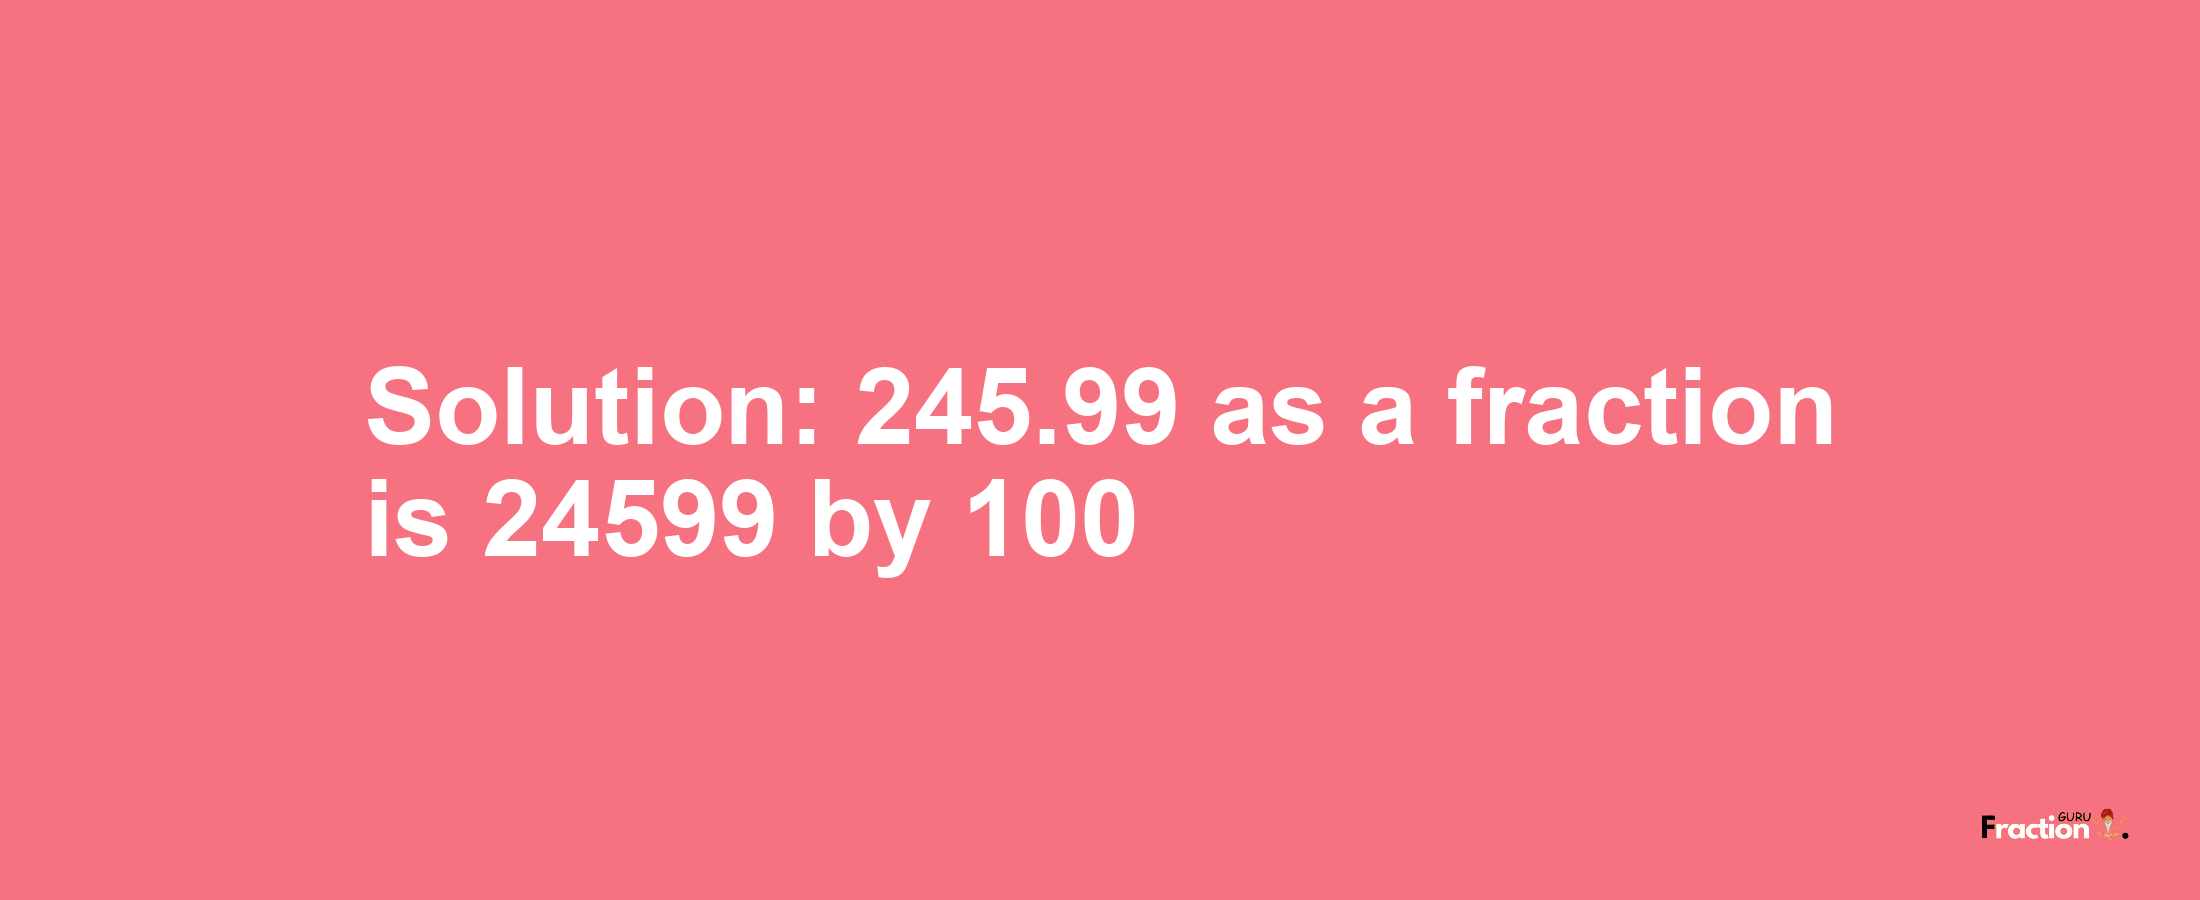 Solution:245.99 as a fraction is 24599/100